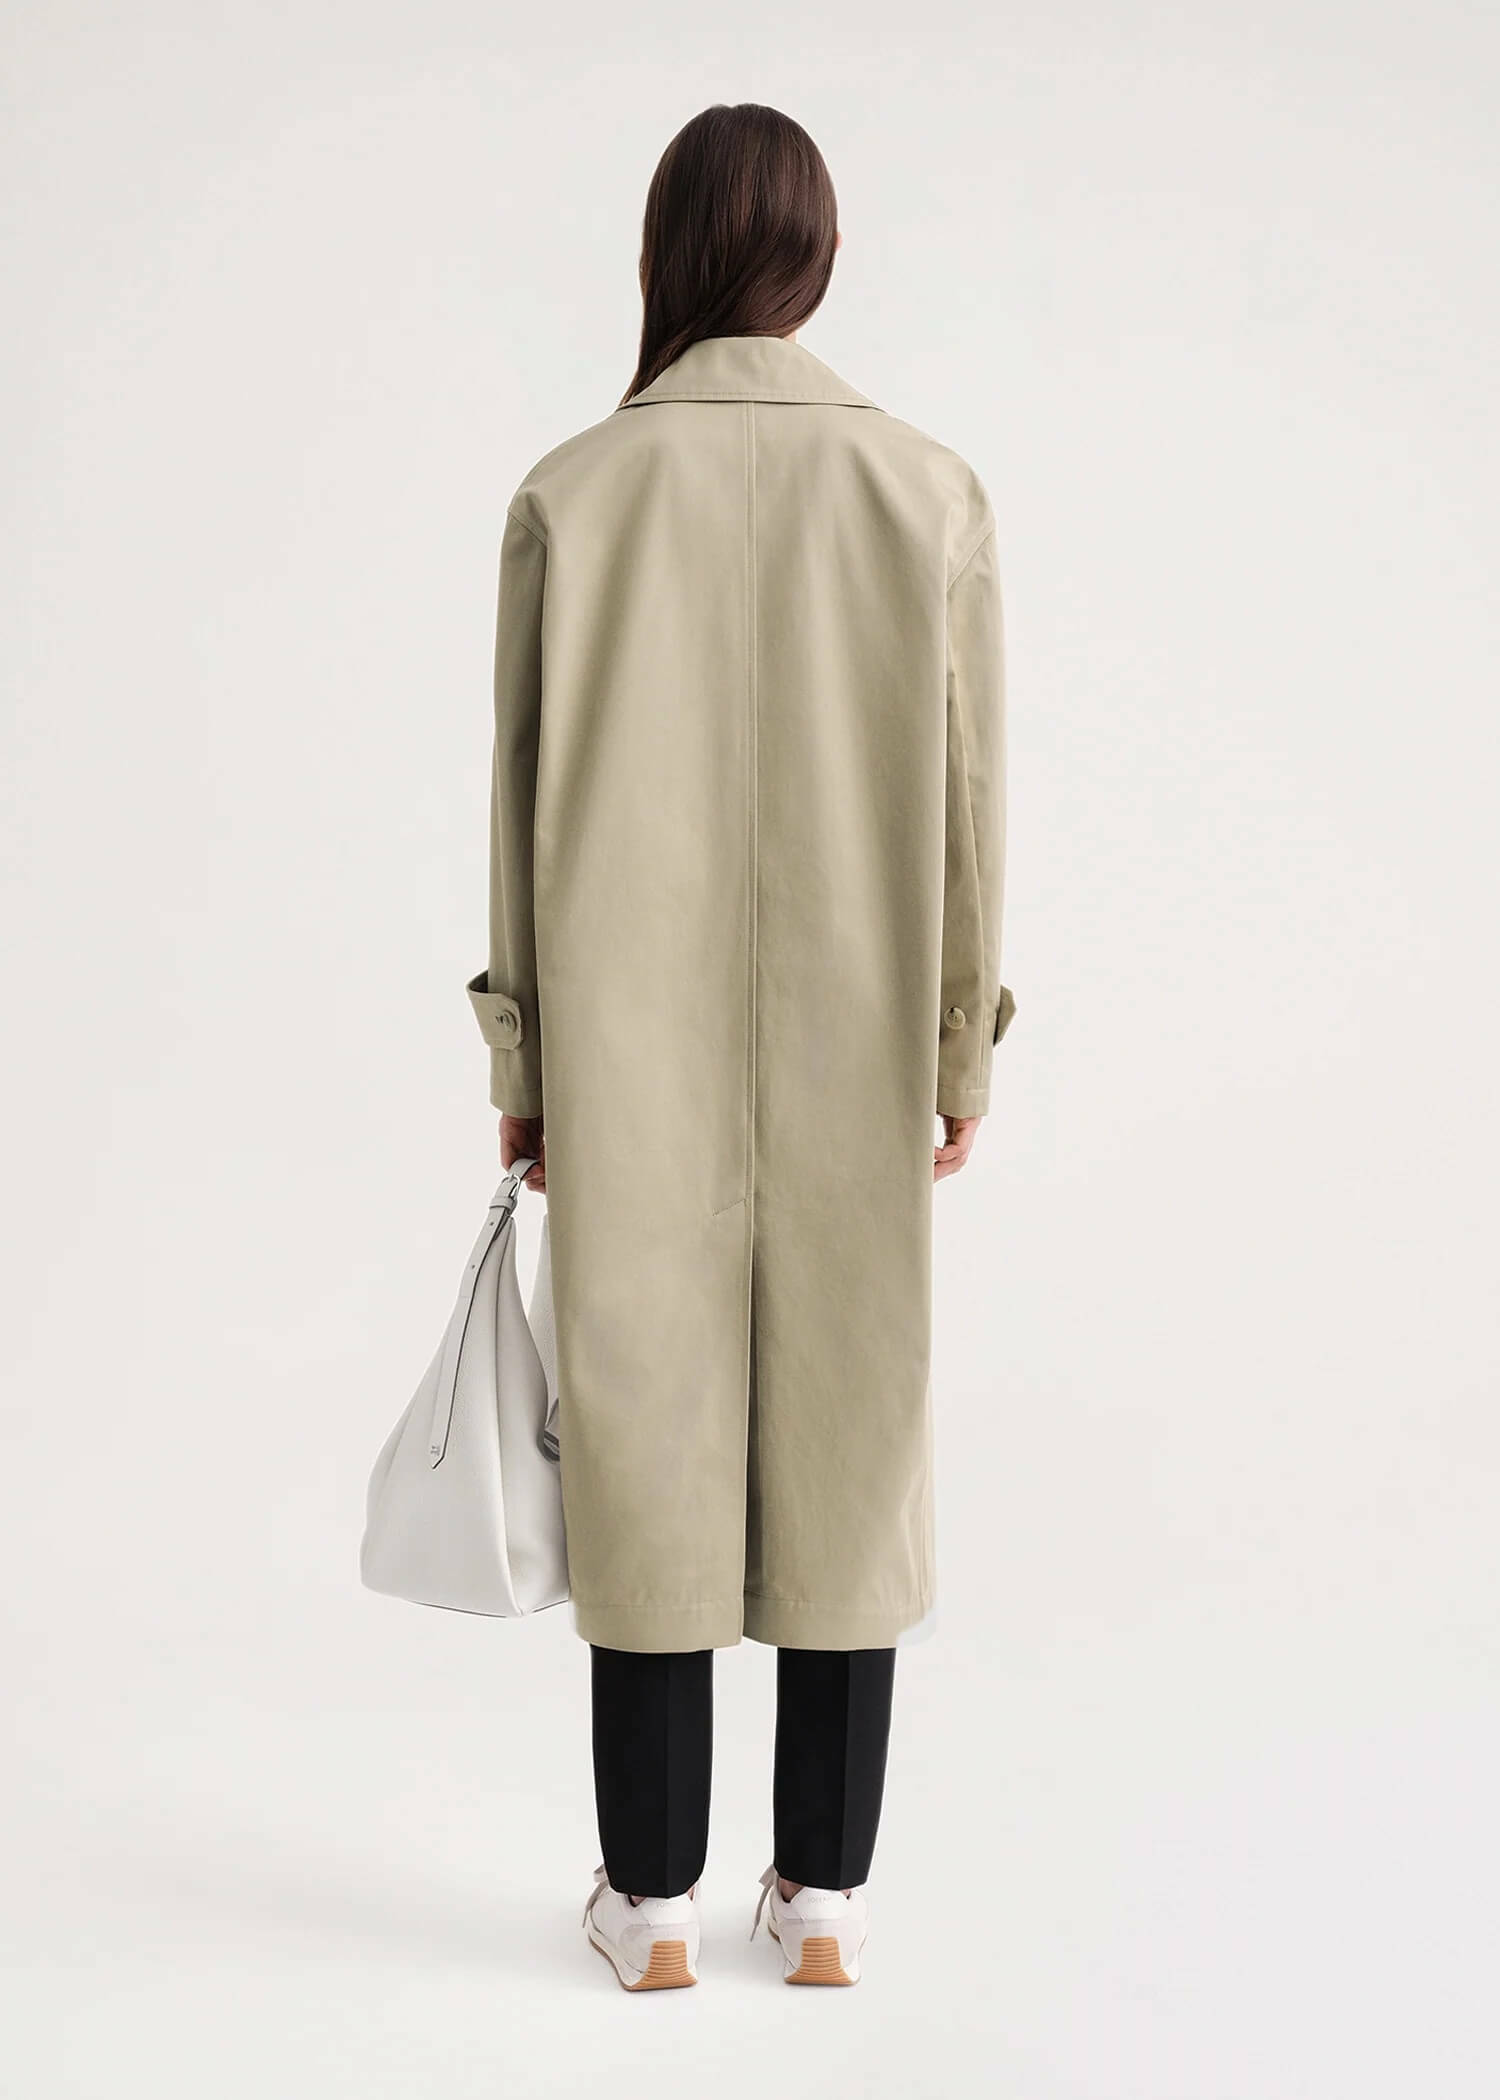 Trench Coat khaki   Women’s Winter Long Cotton Button Stand Collar Jackets Vintage Classic Vintage Plus Size womens Wind Coats commuter workwear Outerwear for petite size woman in beige